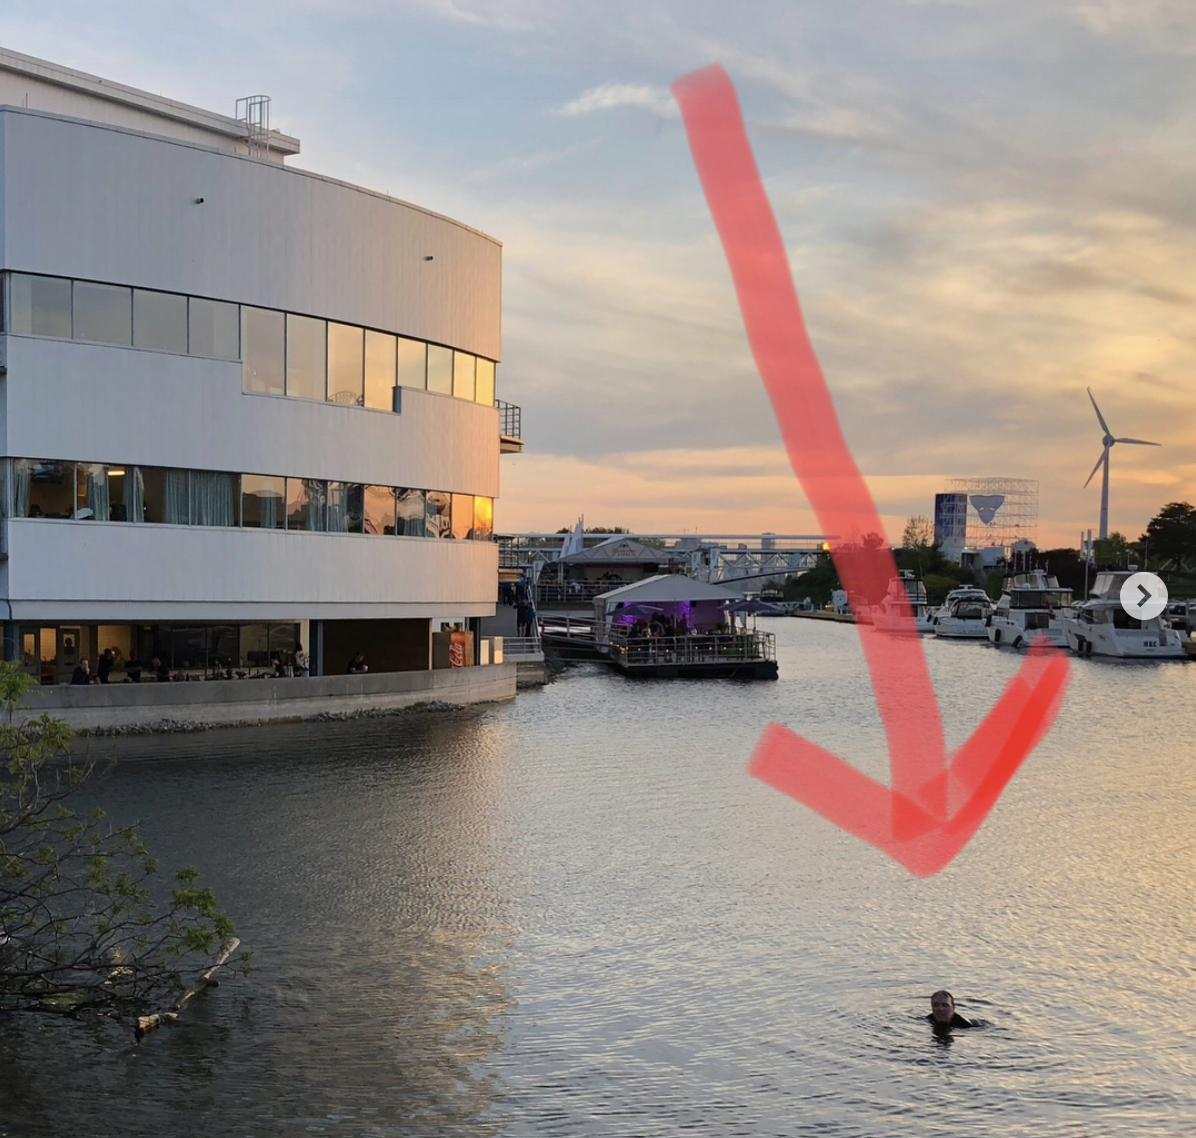 Slayer fan caught in a swim after getting kicked out of Toronto venue